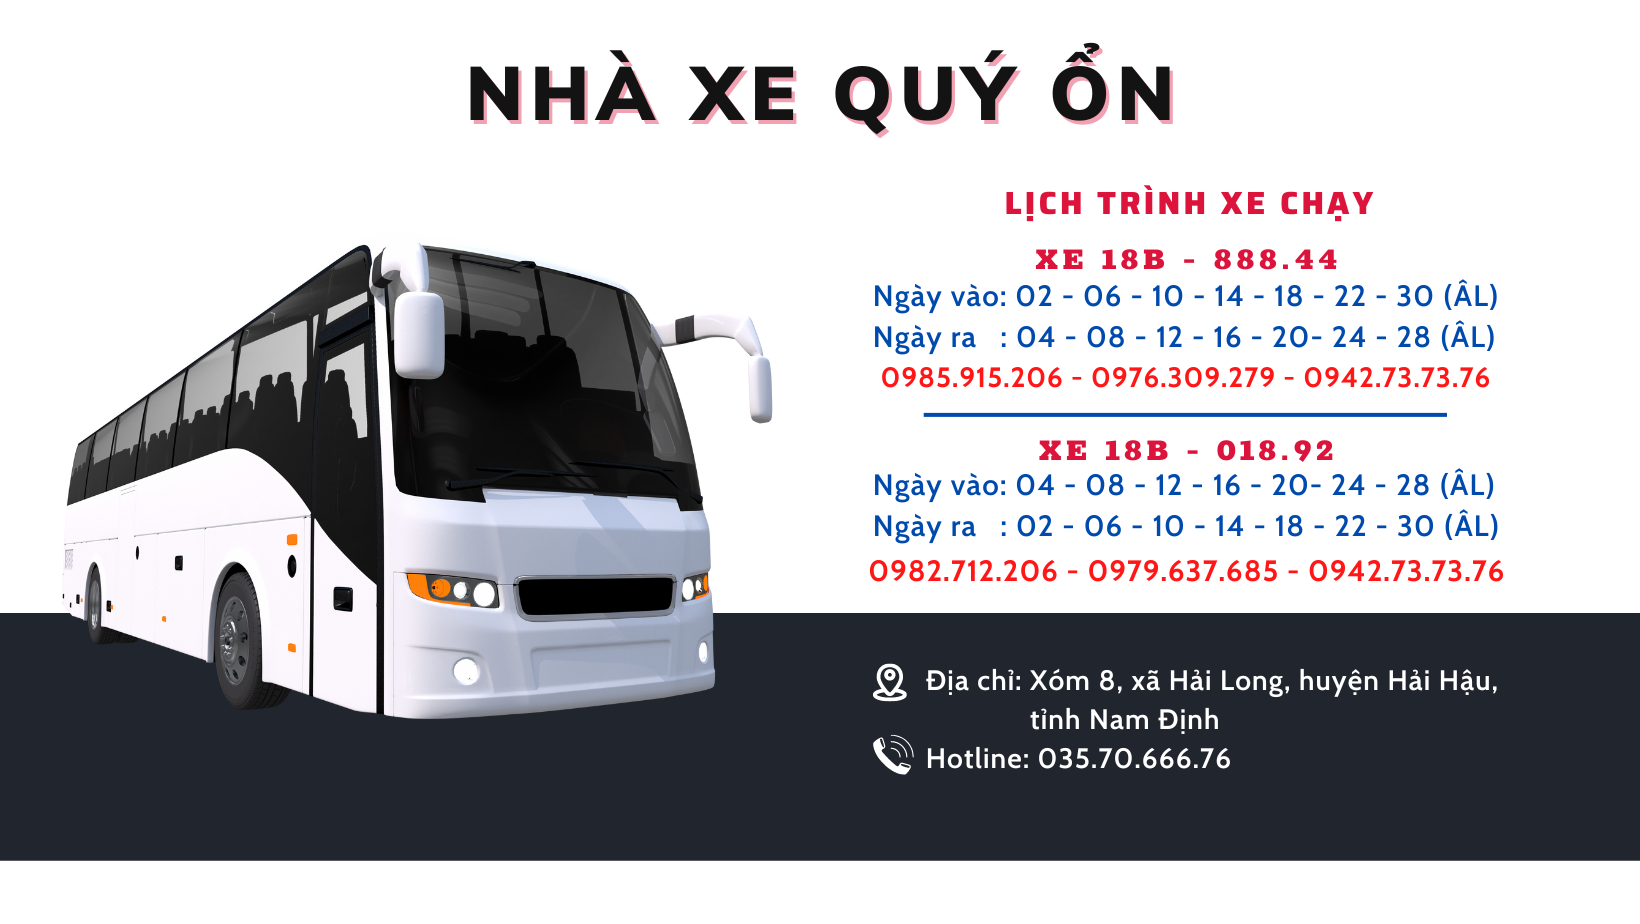 nha-xe-quy-on